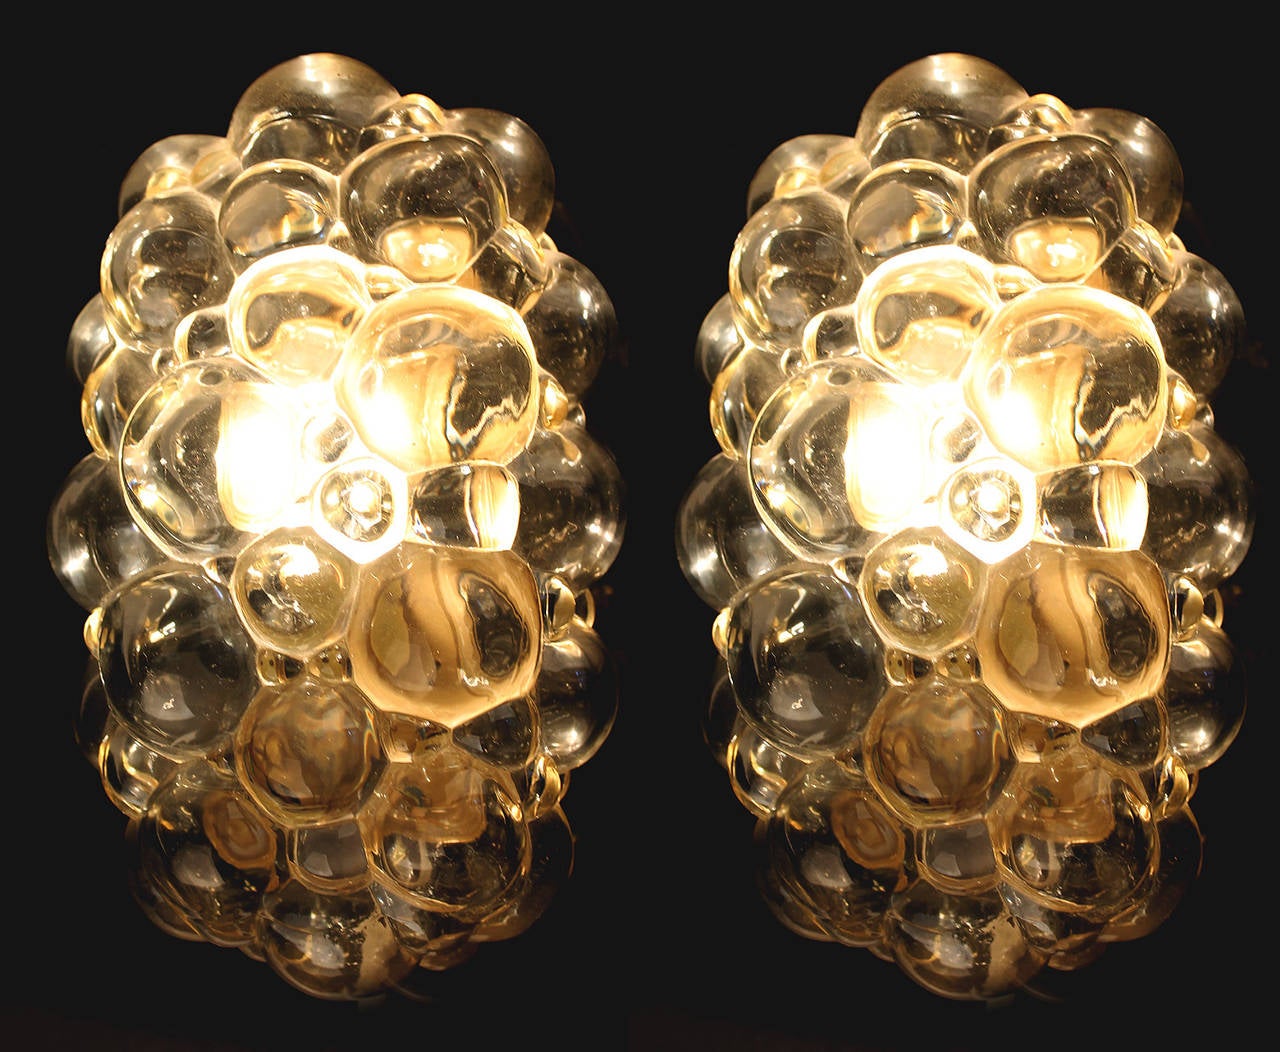 Pair of Bubble Flush Mount Light / Sconce by Limburg, Design by Helena Tynell, made of very thick, glossy bubble shaped glass, glass has slight amber color

1 candelabra size bulb up to 40 watts each